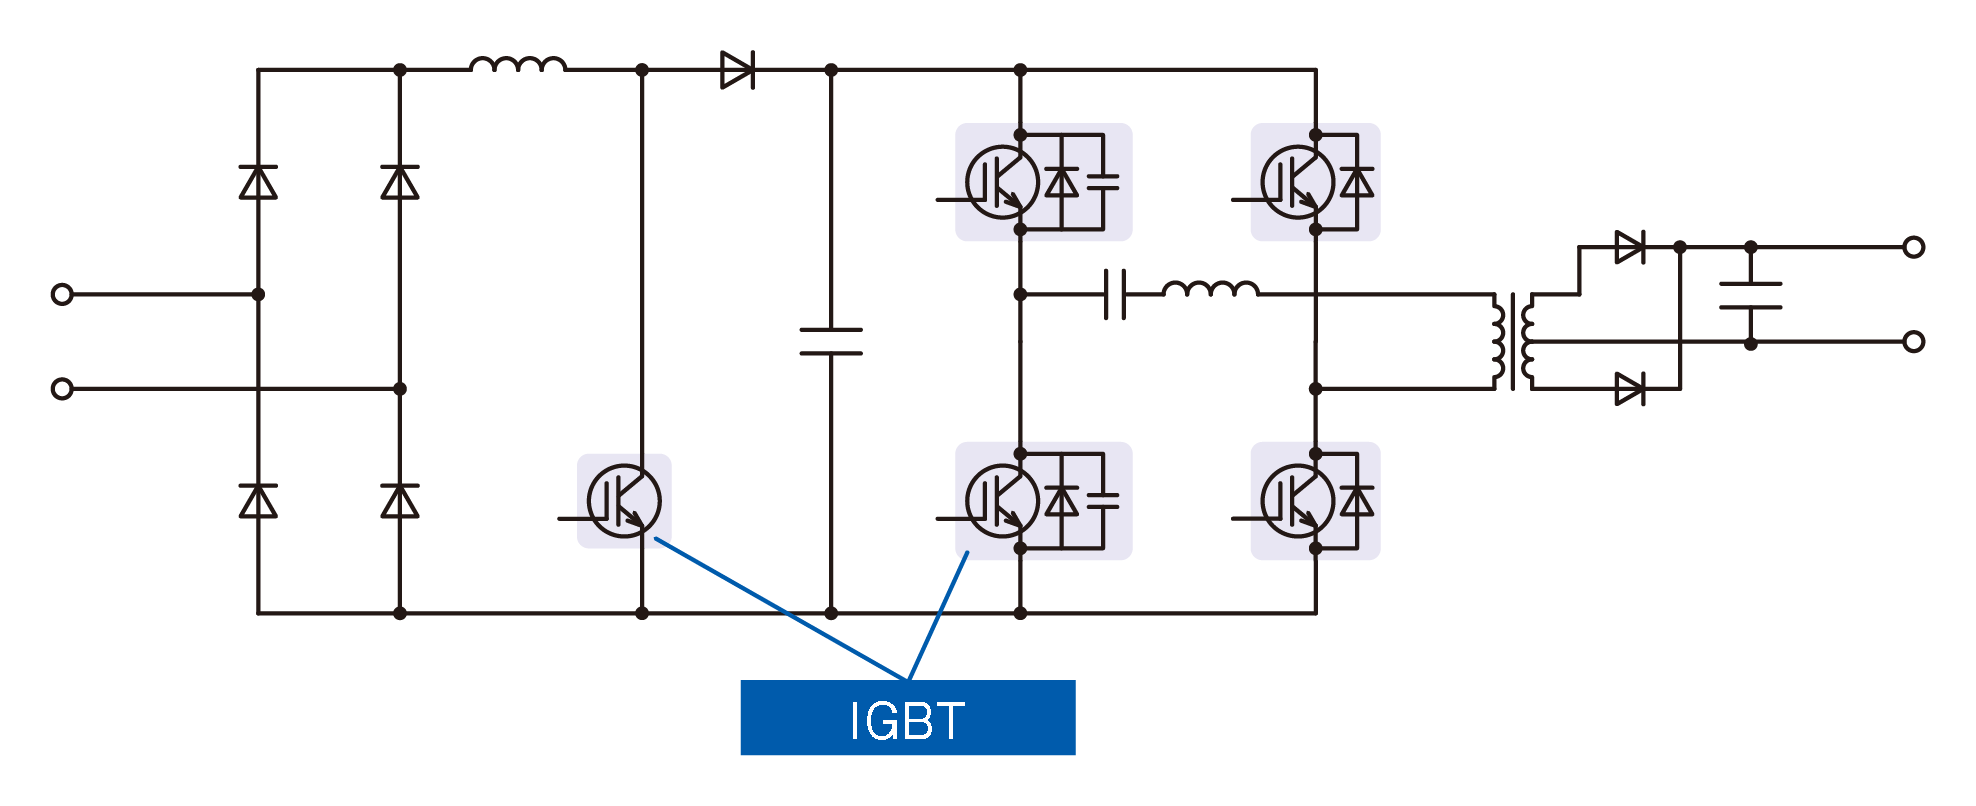 Figure 3. Soft switching type (ZVZCS)